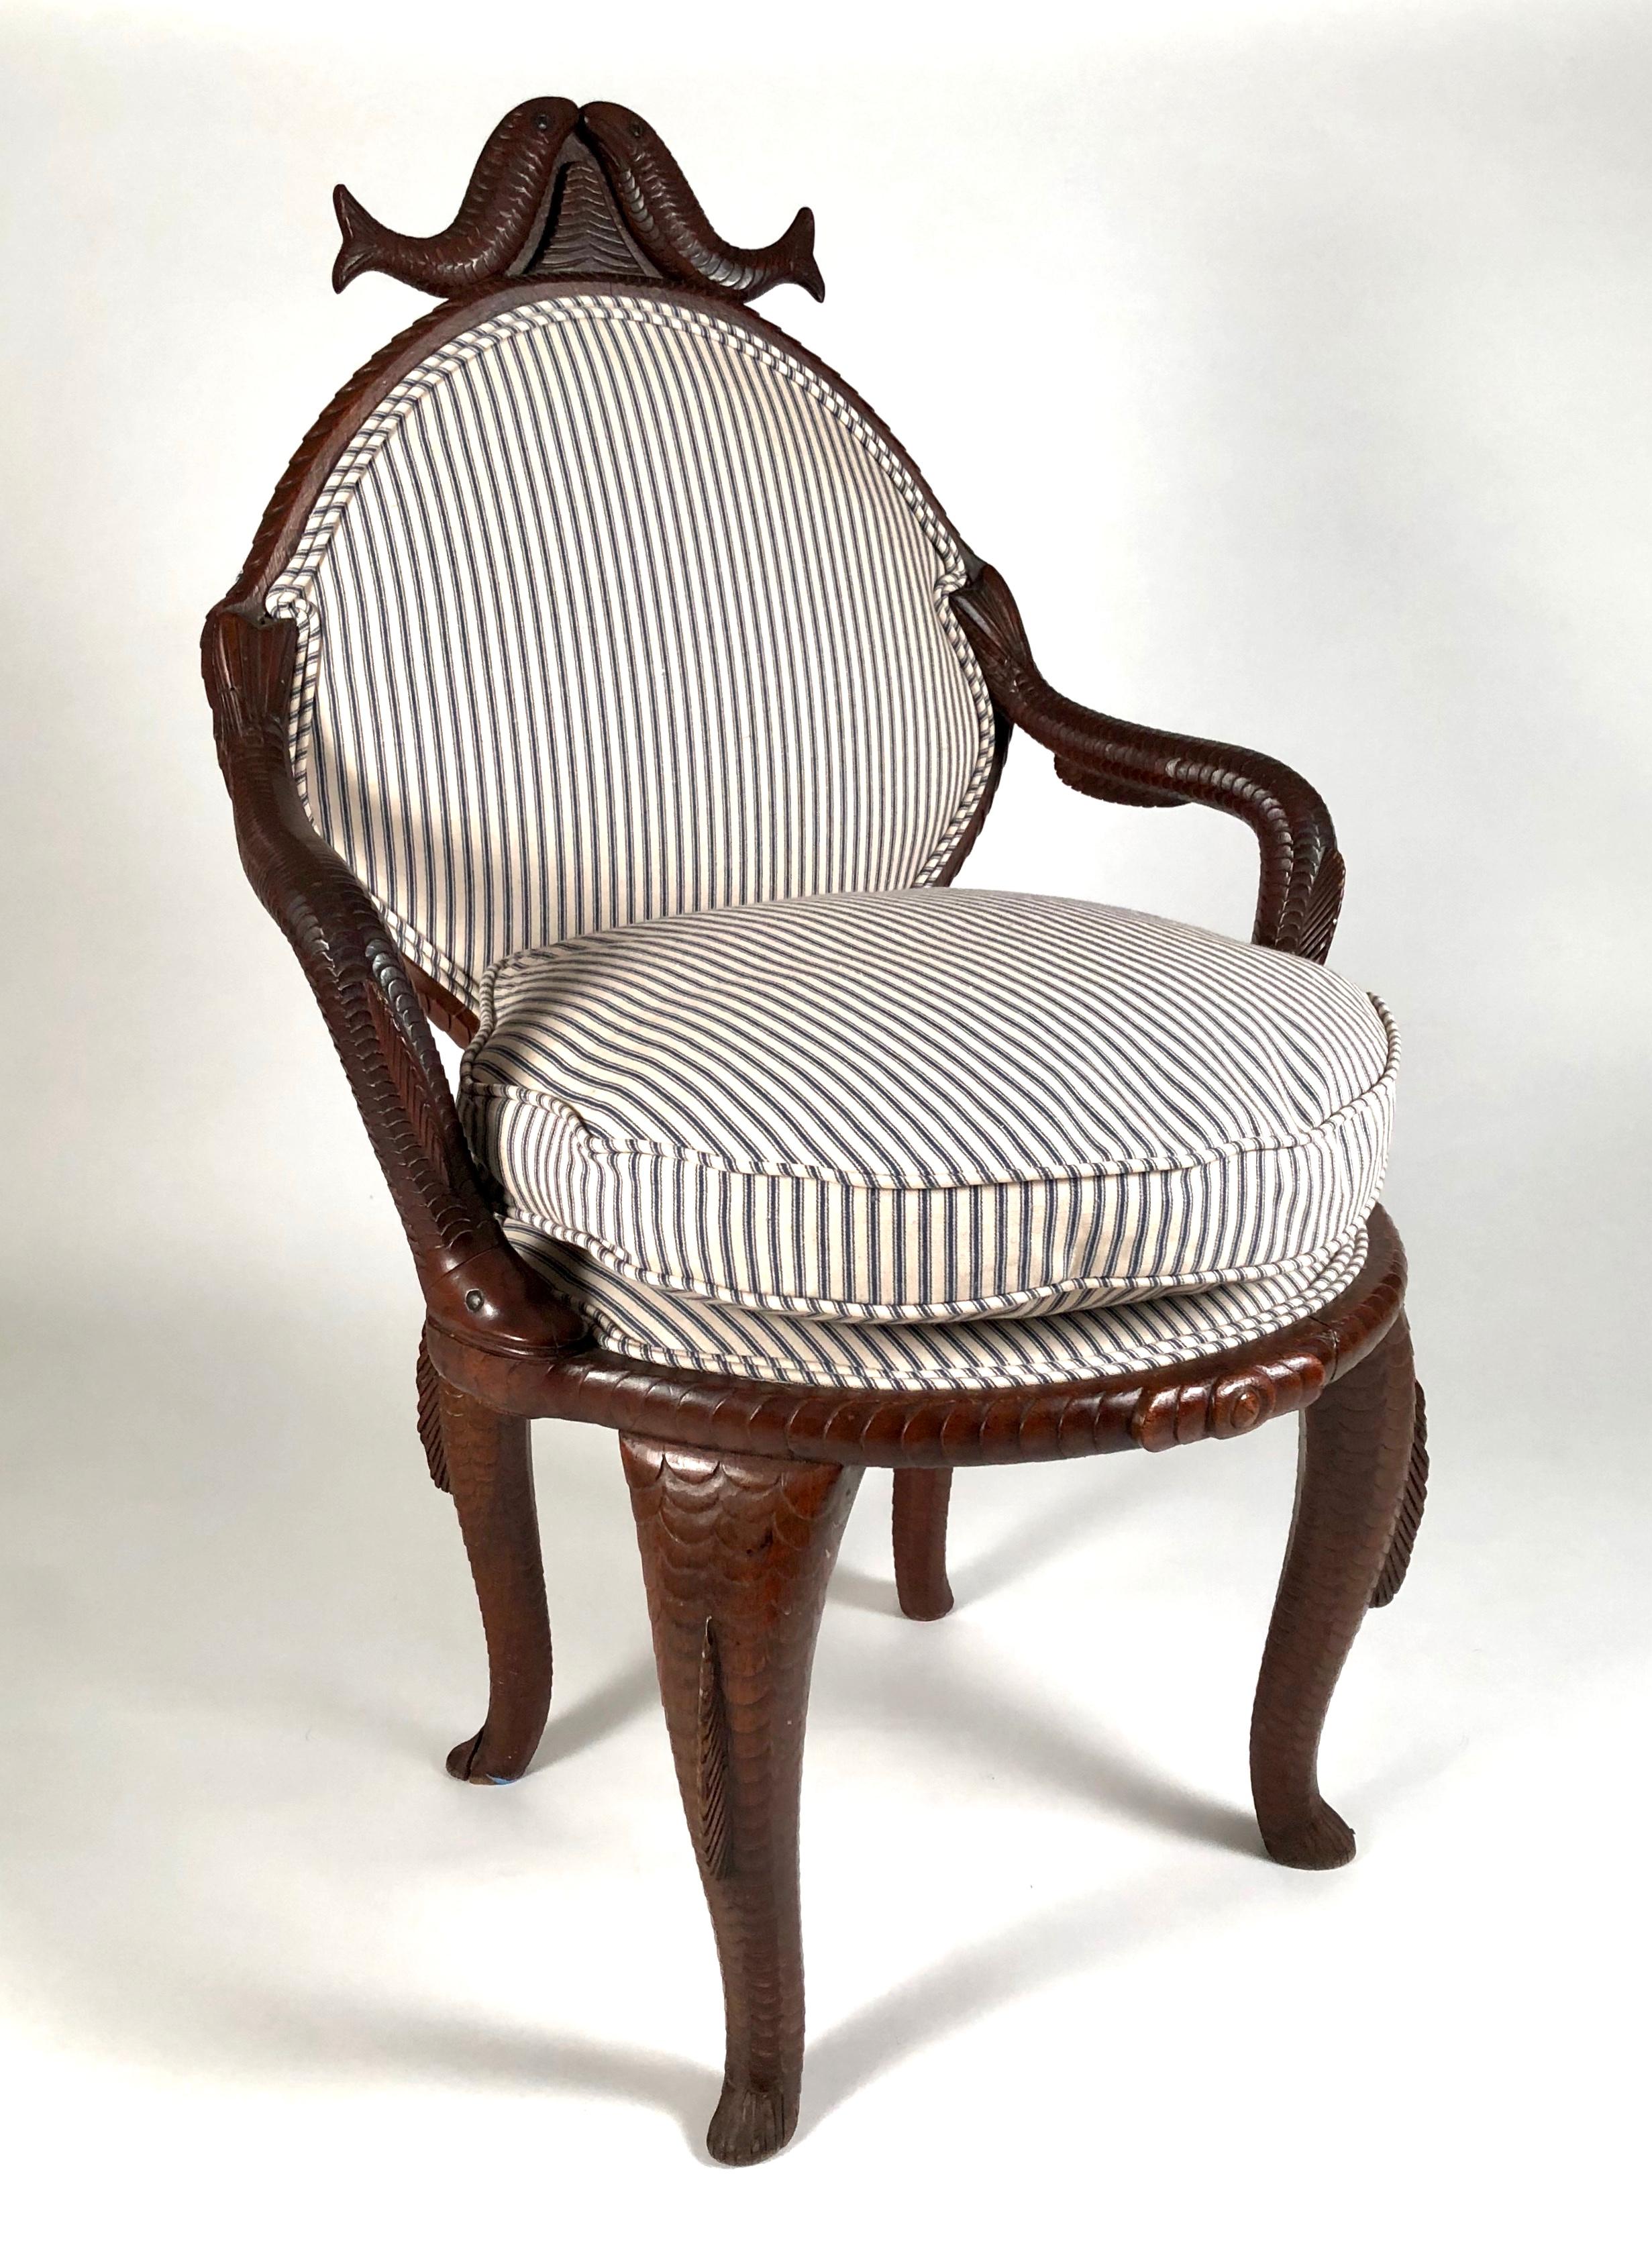 A highly unusual and beautifully made fish decorated 19th century American Folk Art hand carved mahogany open armchair with back, newly upholstered with blue and white striped ticking and down loose seat cushion. The cresting at the top of the back